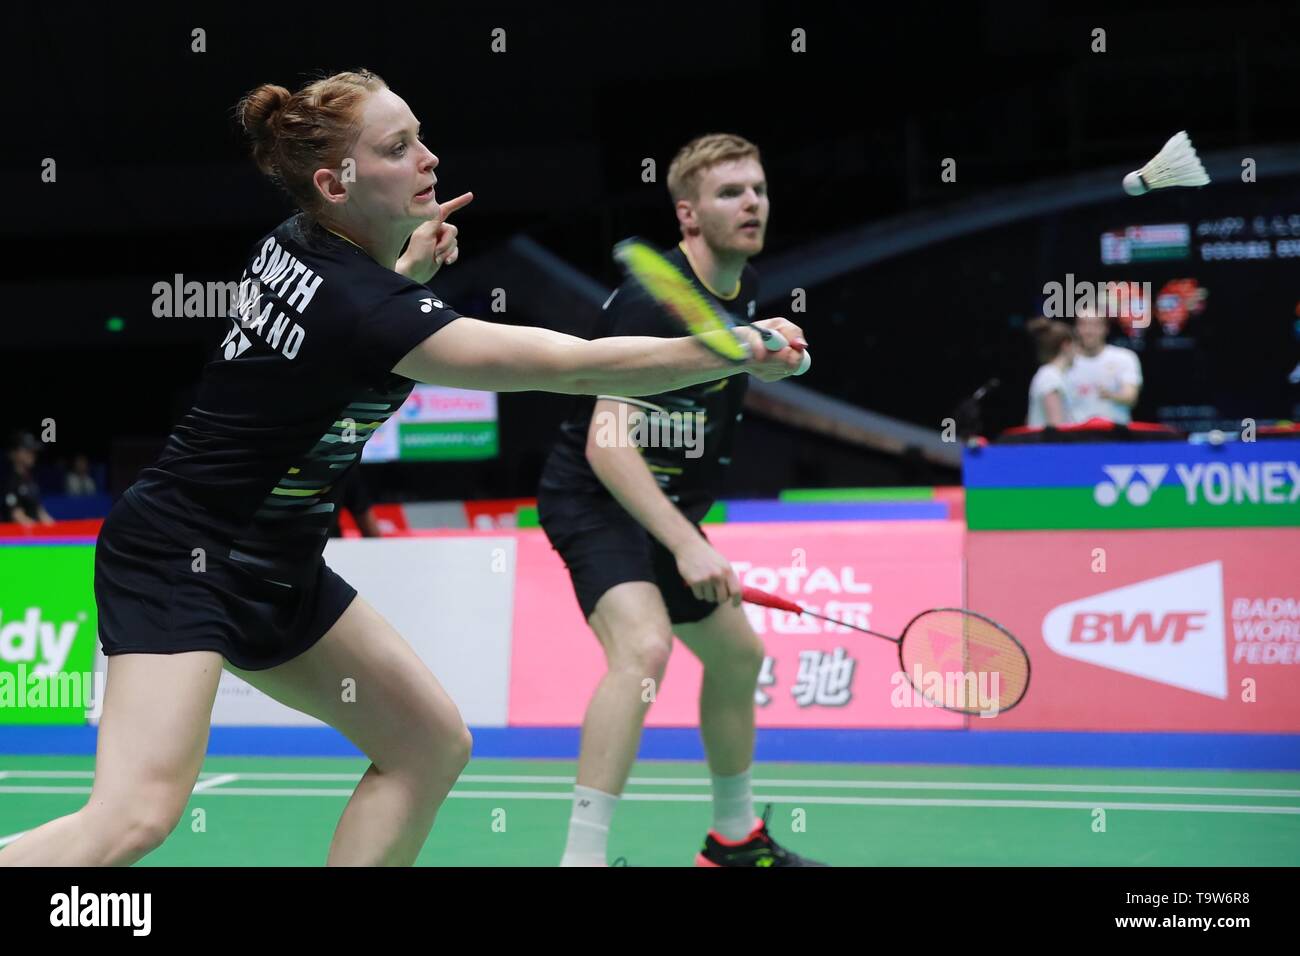 Nanning, China's Guangxi Zhuang Autonomous Region. 20th May, 2019. Marcus Ellis/Lauren Smith(L) of England compete during the mixed doubles match against Mathias Christiansen/Sara Thygesen of Denmark in the group match between Denmark and England at TOTAL BWF Sudirman Cup 2019 held in Nanning, south China's Guangxi Zhuang Autonomous Region, May 20, 2019. Credit: Liu Xu/Xinhua/Alamy Live News Stock Photo